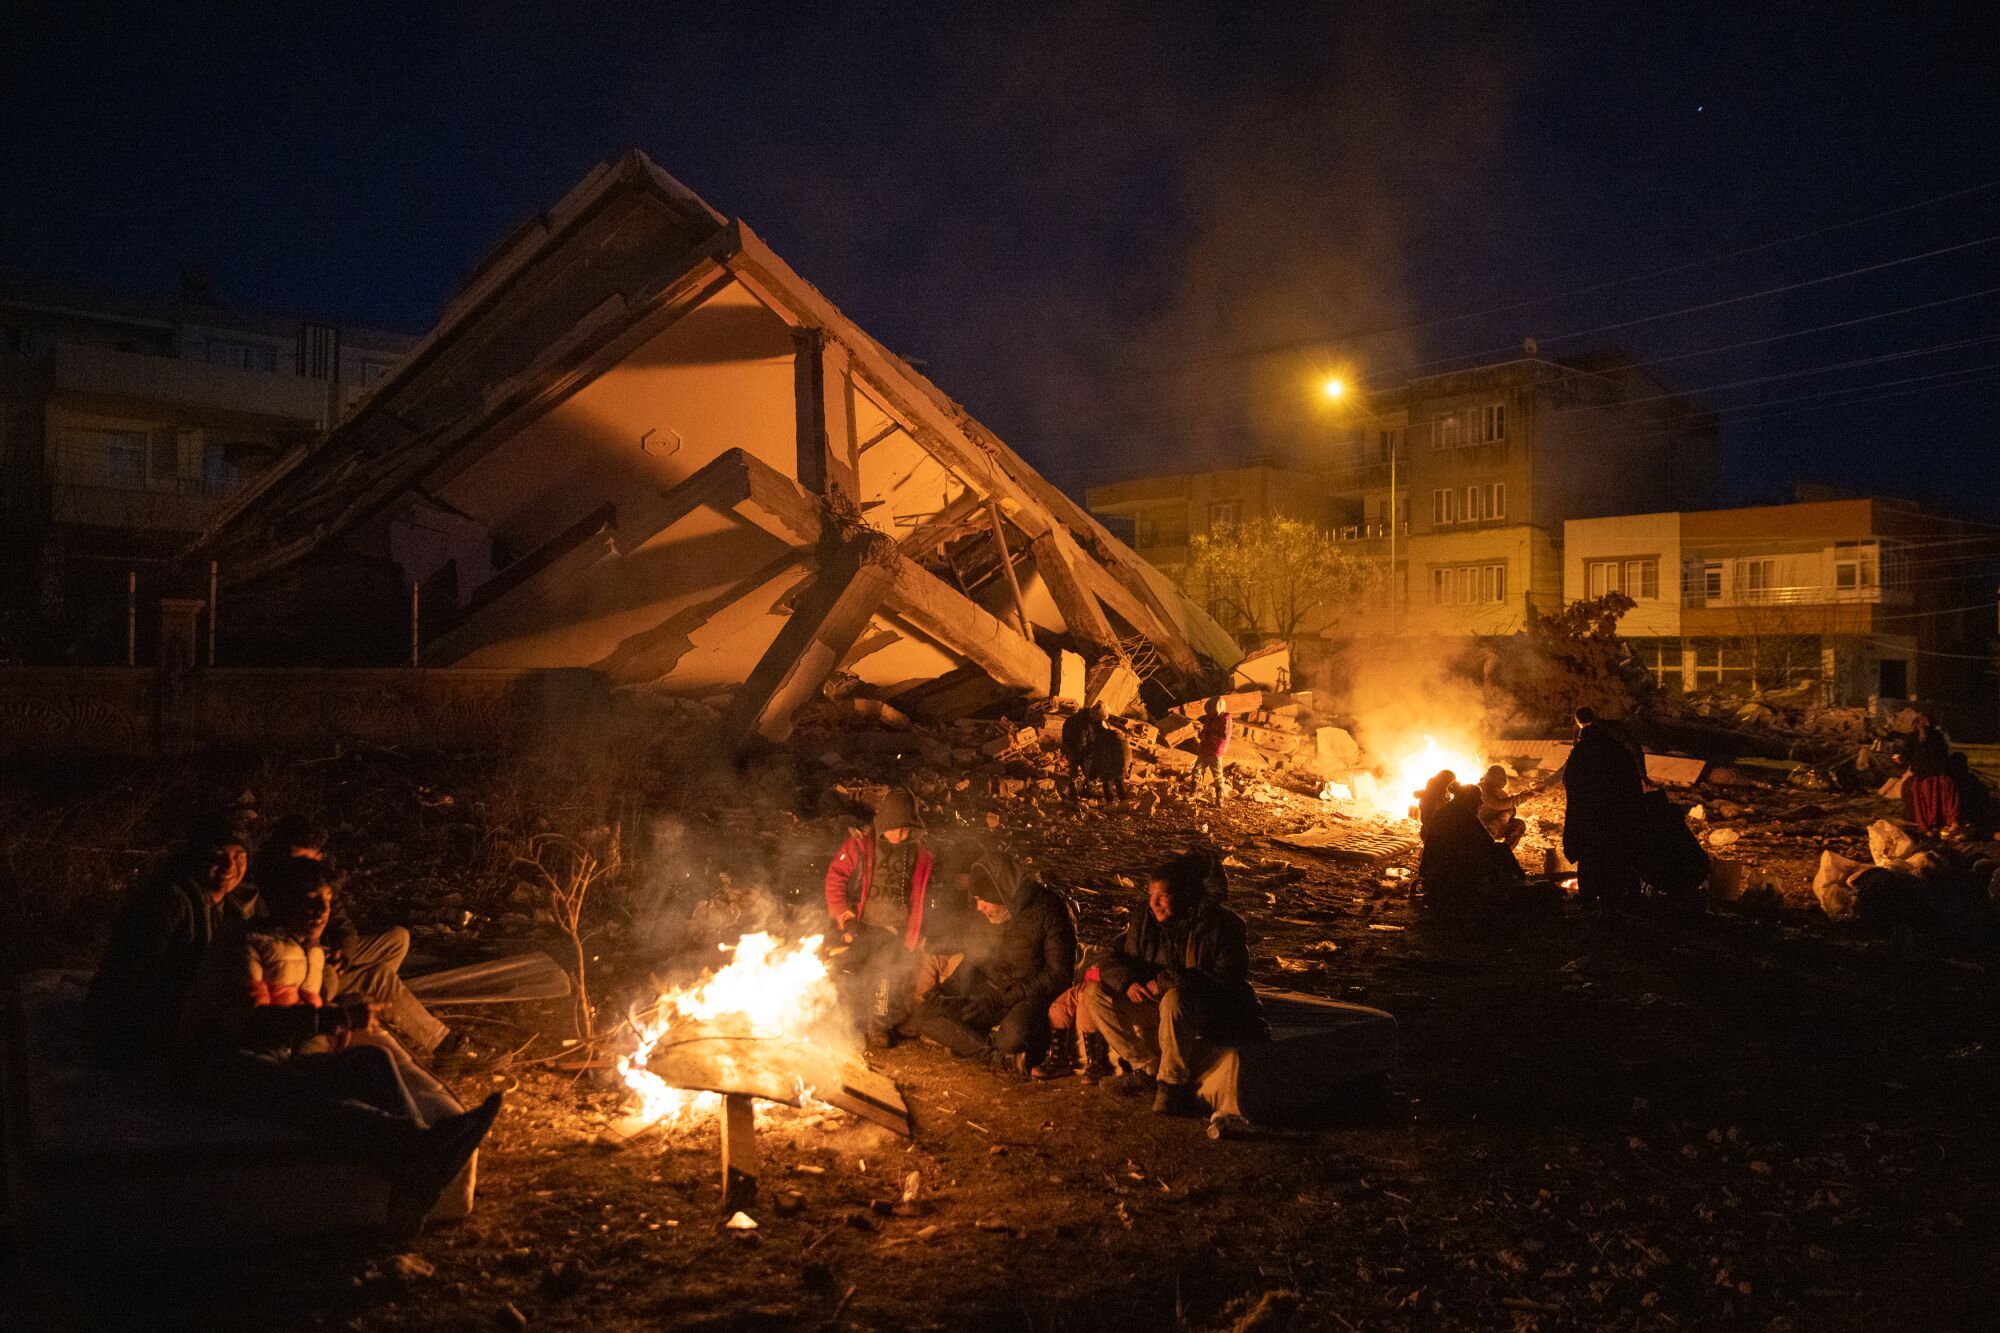 Displaced people sit around camp fires surrounded by destroyed buildings in the dark